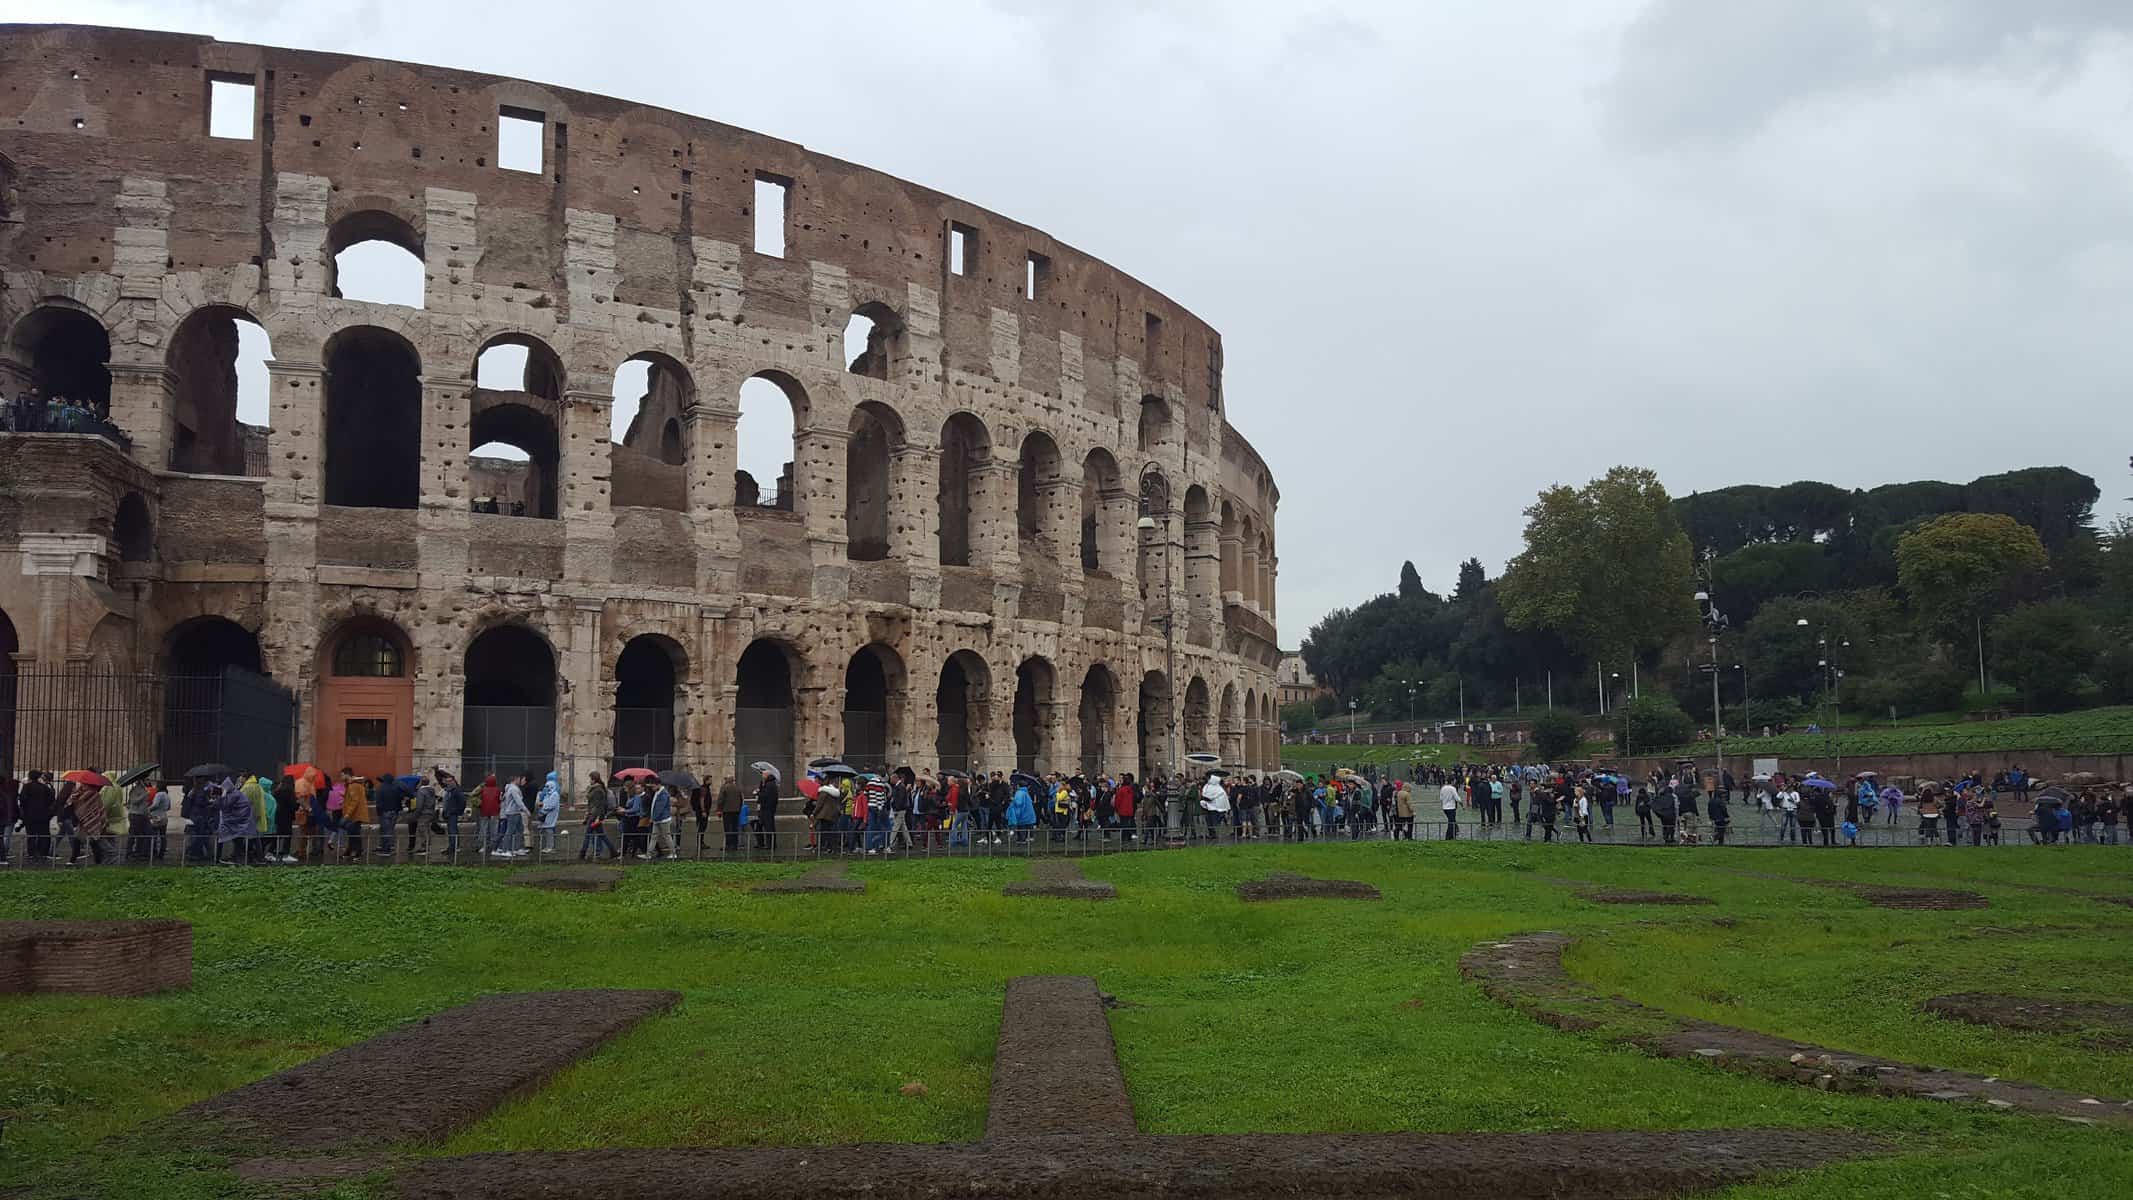 Outside picture of the Coliseum in Rome, Italy